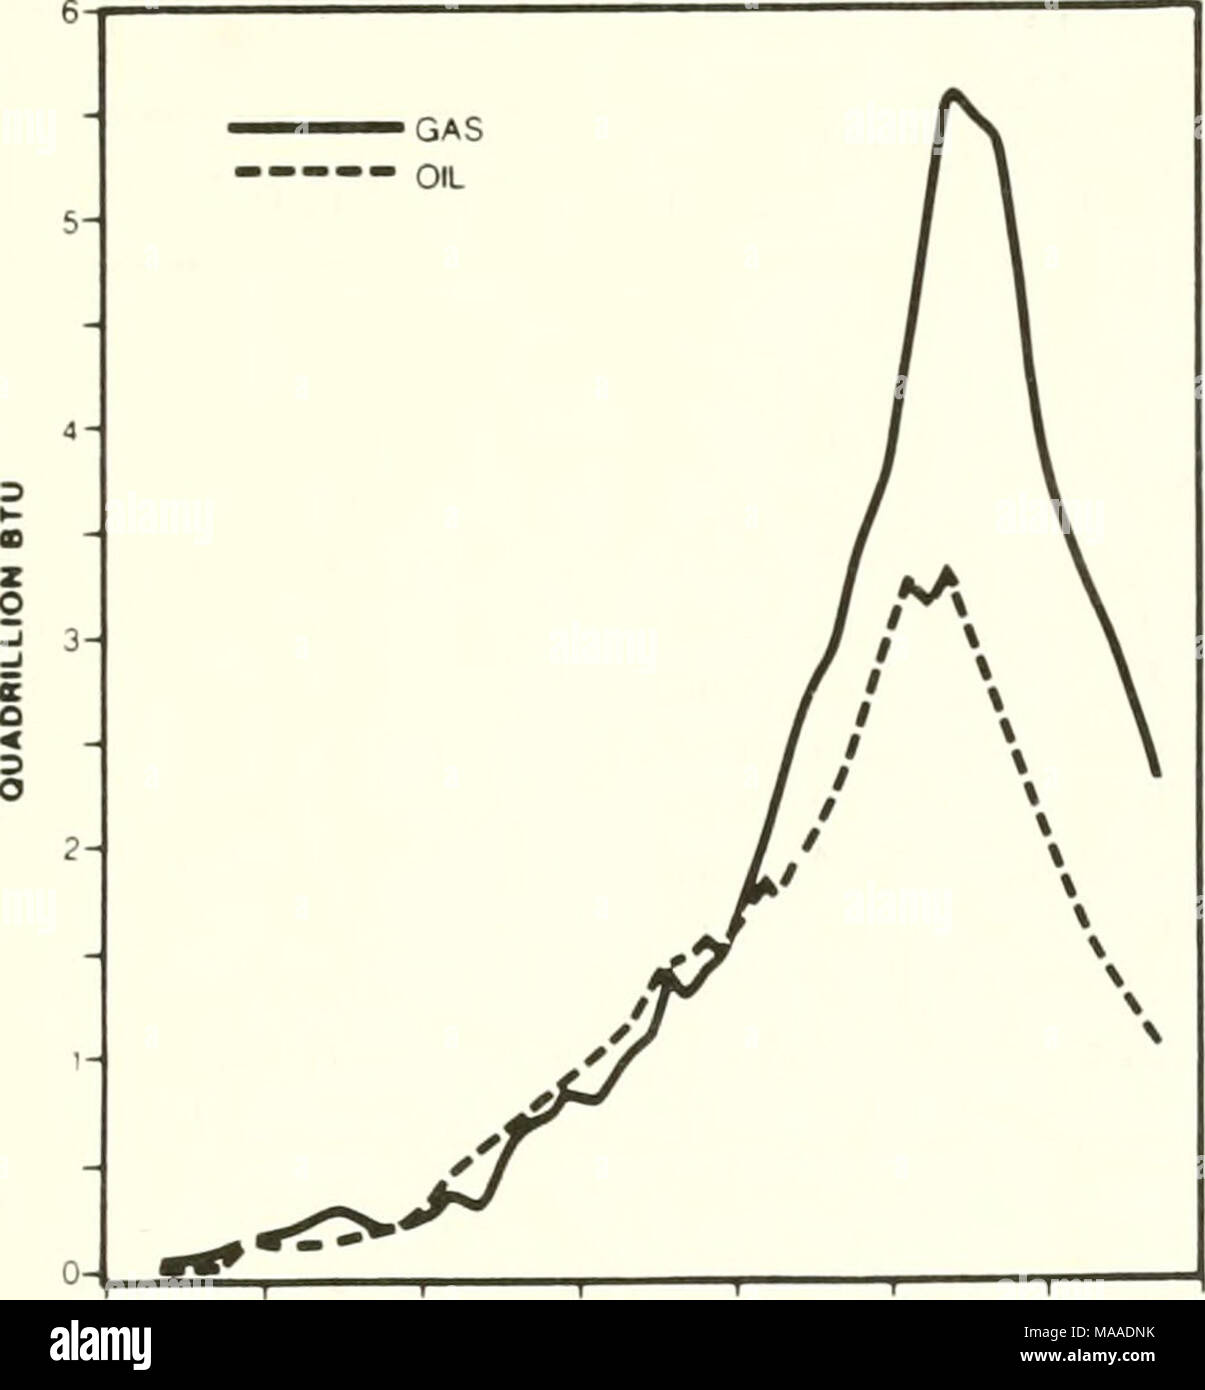 . The ecology of delta marshes of coastal Louisiana : a community profile . 1915 1925 1936 1946 1965 1975 1985 Figure 4. Louisiana oil and gas production (Costanza and Cleveland 1984). beneficial effect of the Mississippi River water and nutrients on aquatic productivity was generally understood (Gunter 1938; Viosca 1927; Riley 1937). Also during this decade articles devoted specifically to marsh plants were published (Brown 1936; Penfound and Hathaway 1936). These were soon followed by articles that focused on the relation of environmental factors, particularly salinity and inundation, to pla Stock Photo